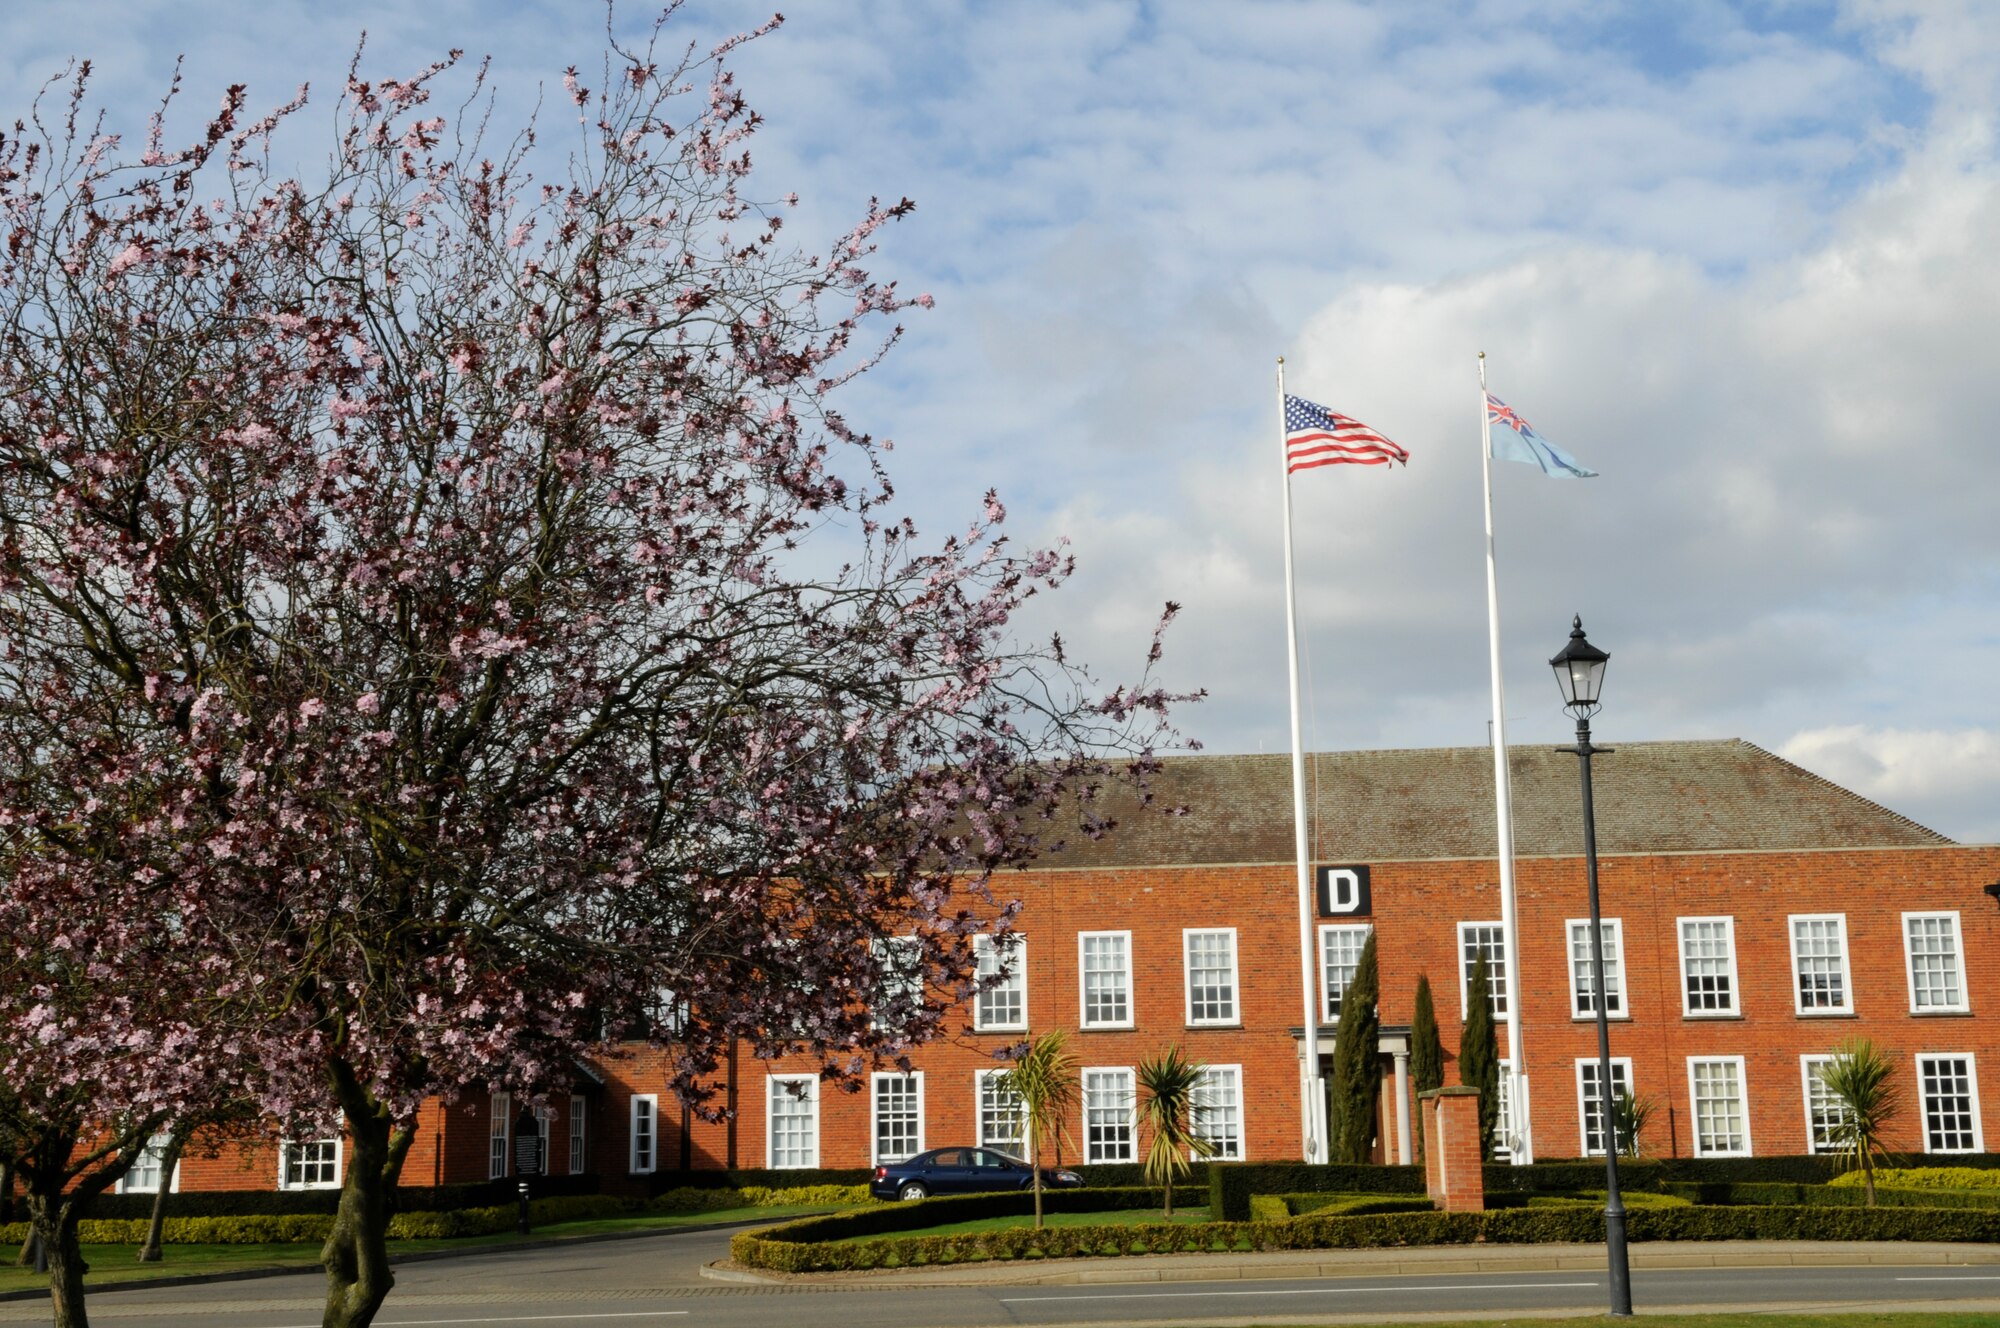 Early blooming trees show the first signs of spring on RAF Mildenhall, March 24, 2009.  Everyone is reminded that time in the United Kingdom will spring forward one hour at 1 a.m., Sunday, March 29. (U.S. Air Force Photo by SrA Christopher L. Ingersoll